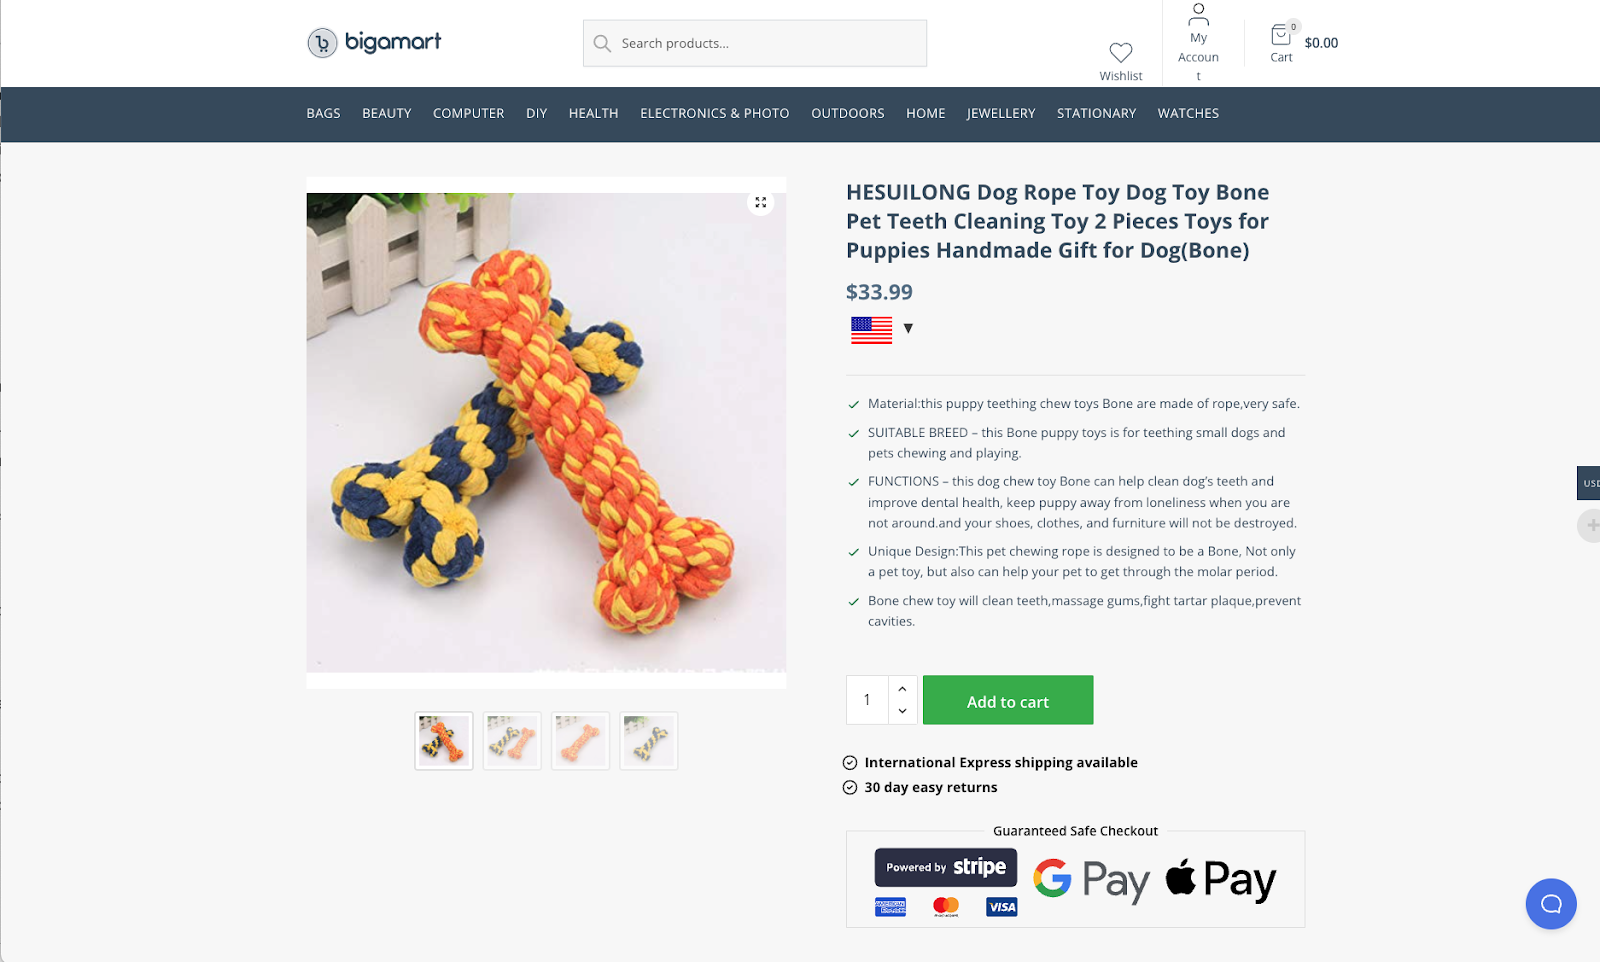 Dog Toys and Accessories: A Growing Niche 01